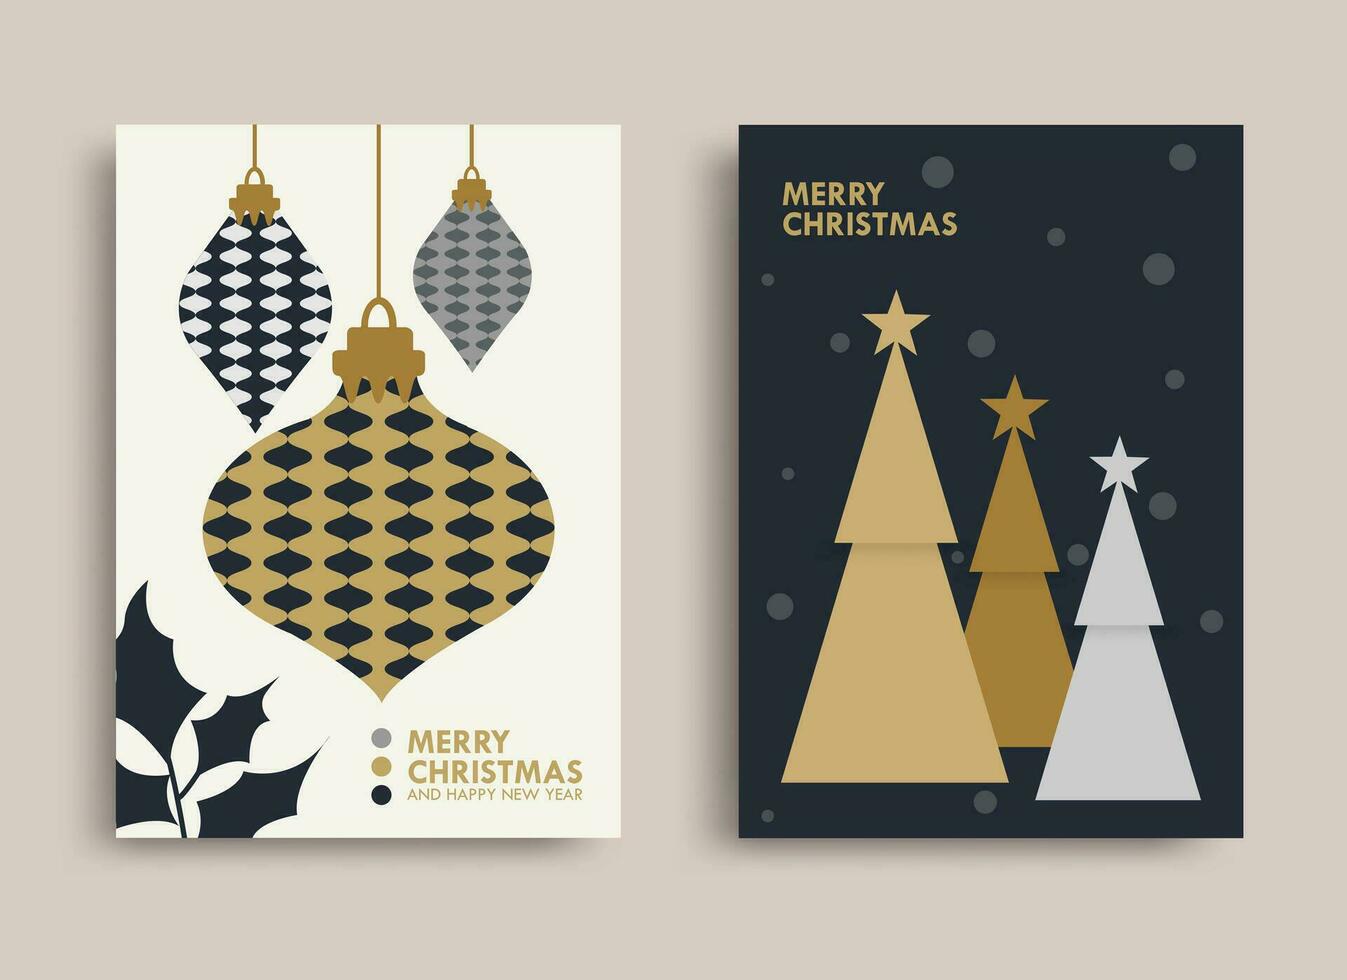 Set of Christmas ornament and Christmas trees. Dark theme Vector illustration concepts for graphic and web design, social media banners, and marketing material.